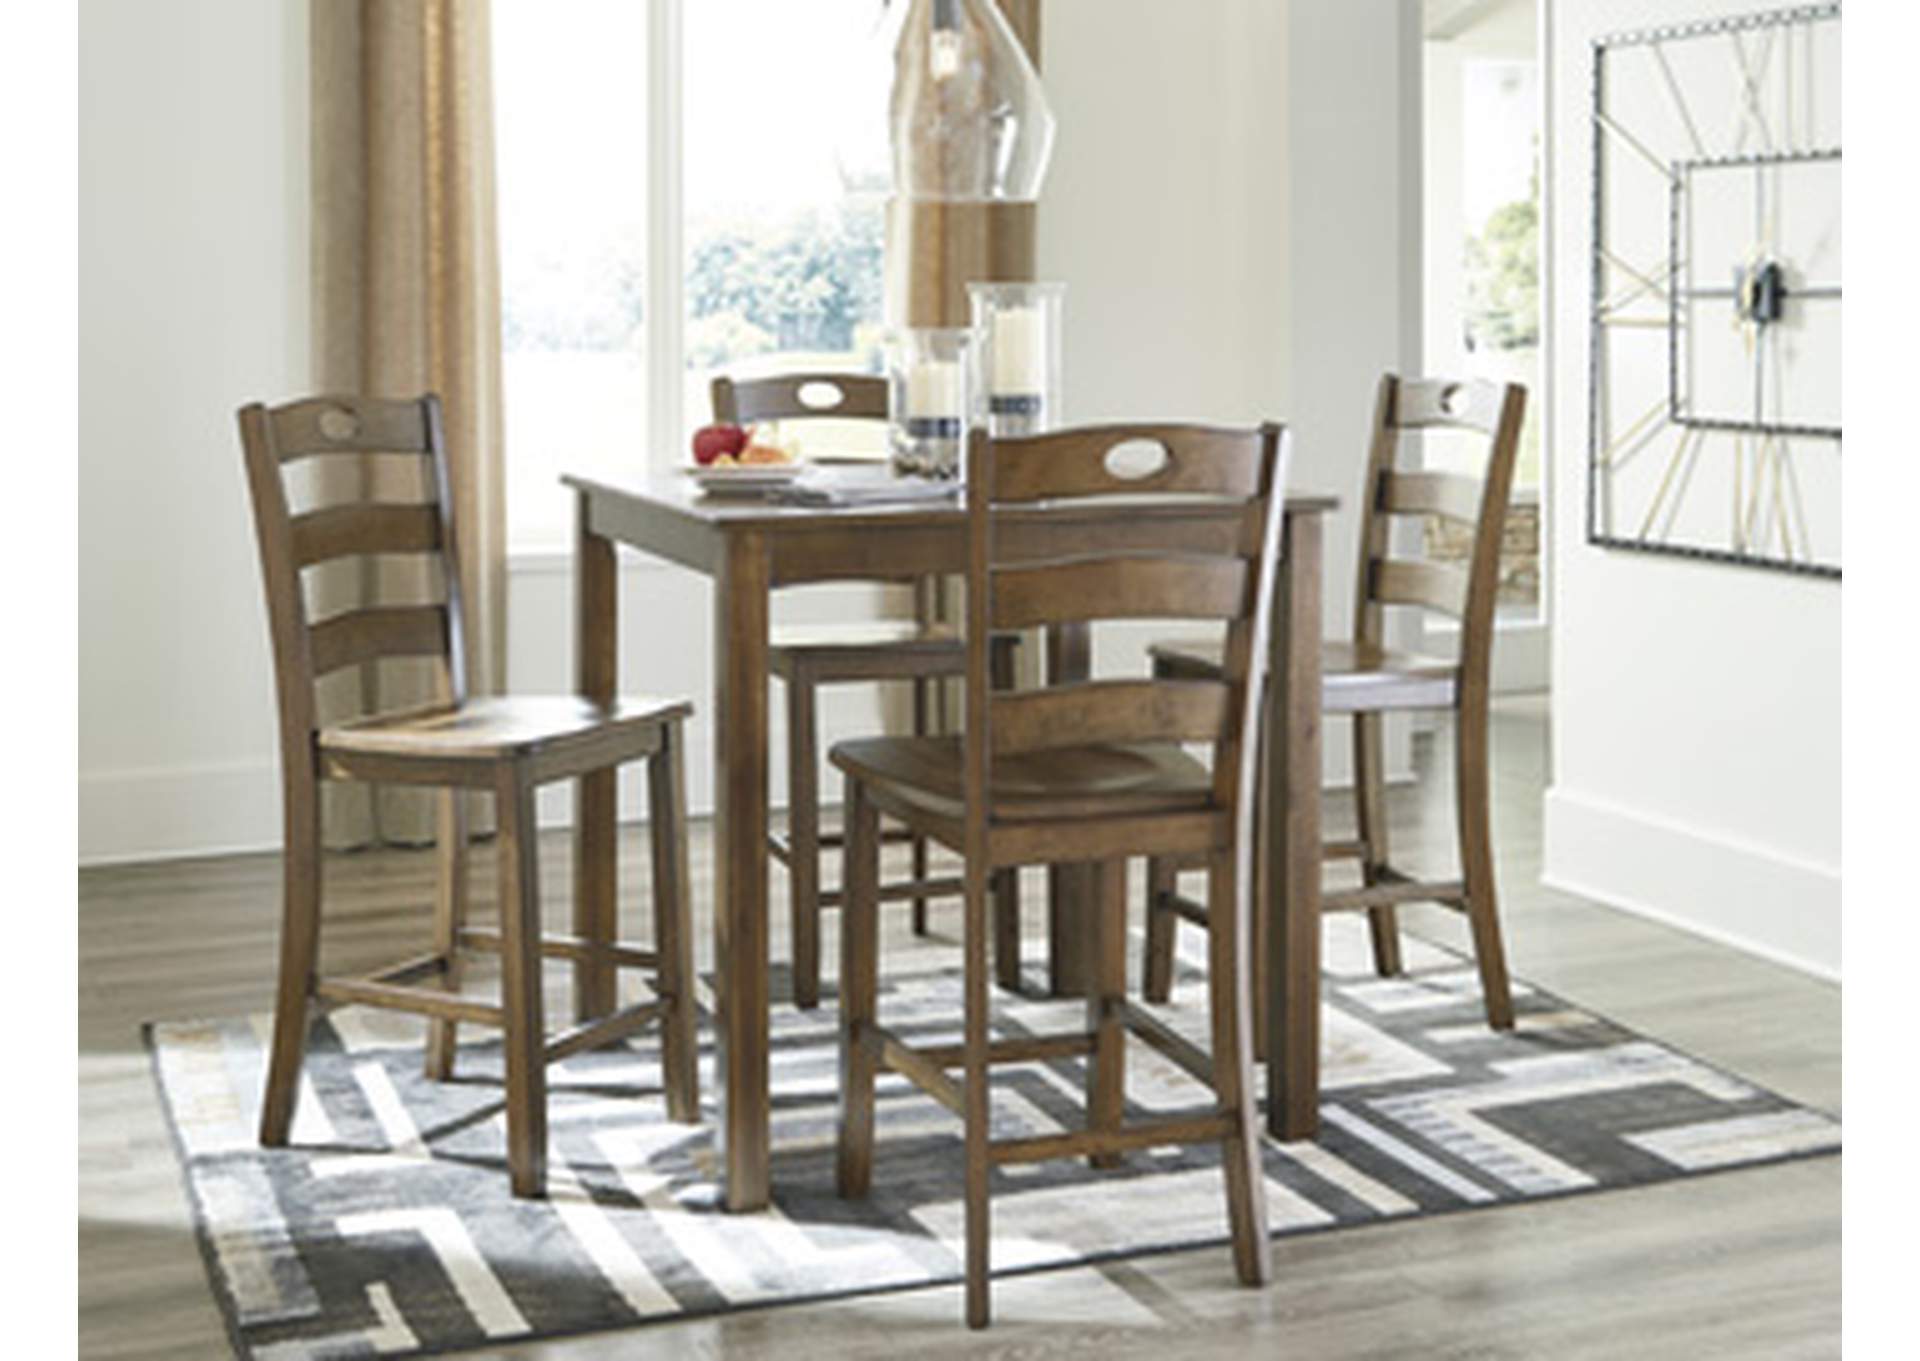 Hazelteen Counter Height Dining Room Table and Bar Stools (Set of 5)